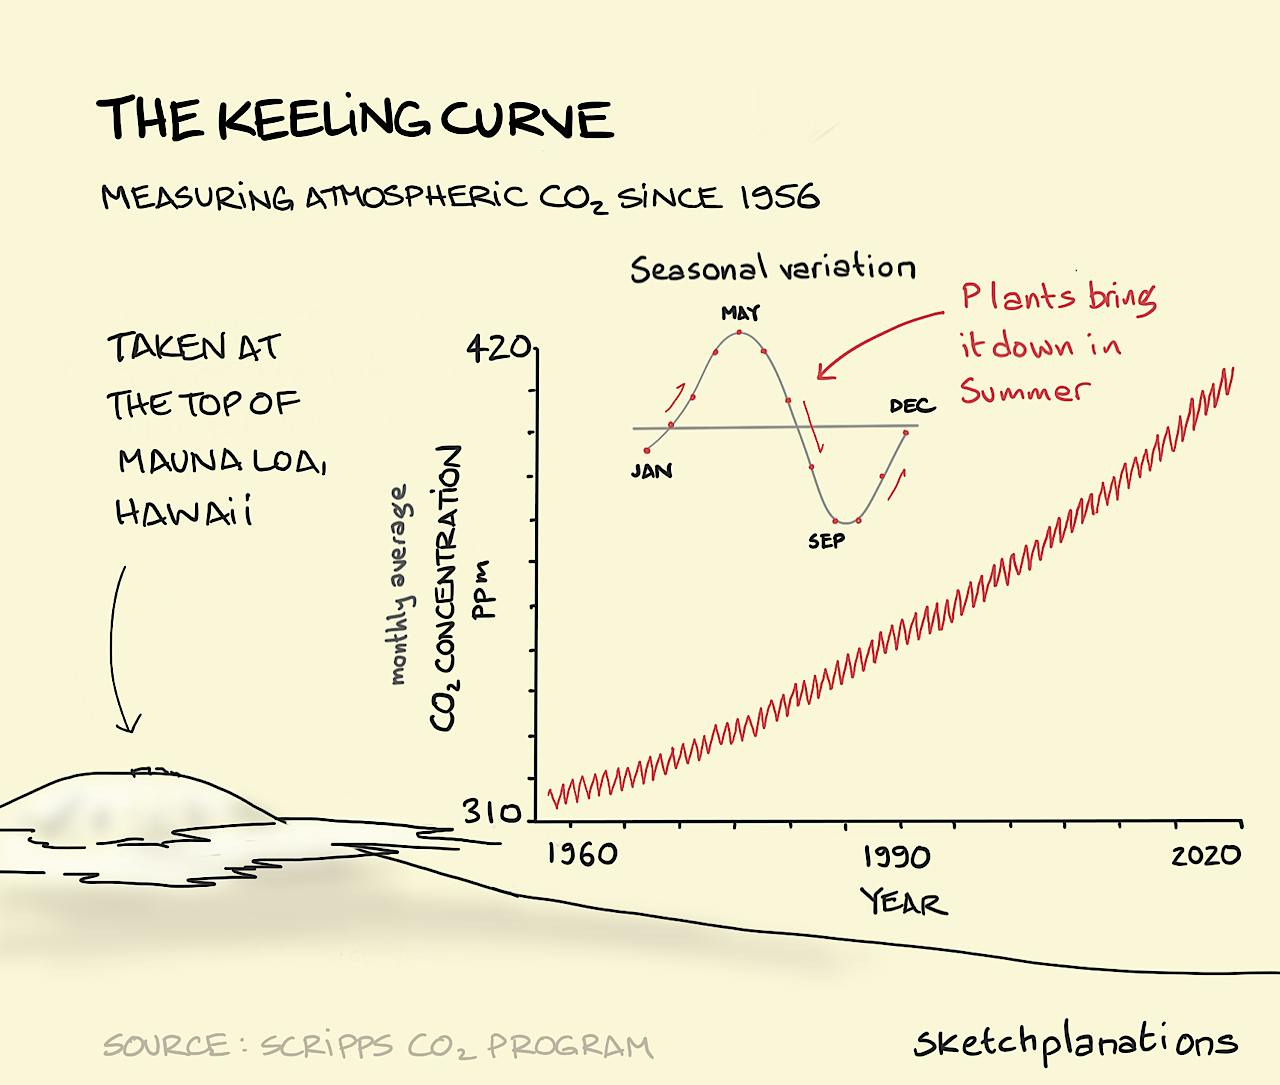 The Keeling Curve illustration: A line graph shows a tight zig-zag red line rising from around 310 parts per million (ppm) monthly average CO2 concentration in the air at the top of Mauna Loa volcano in Hawaii in 1960, up to 410 ppm in 2020. The smaller graph at the top shows the reason for the zig-zag nature of the line; the seasonal variation of CO2 concentration in the air due to more plants blooming and photosynthesising in Spring and Summer. 